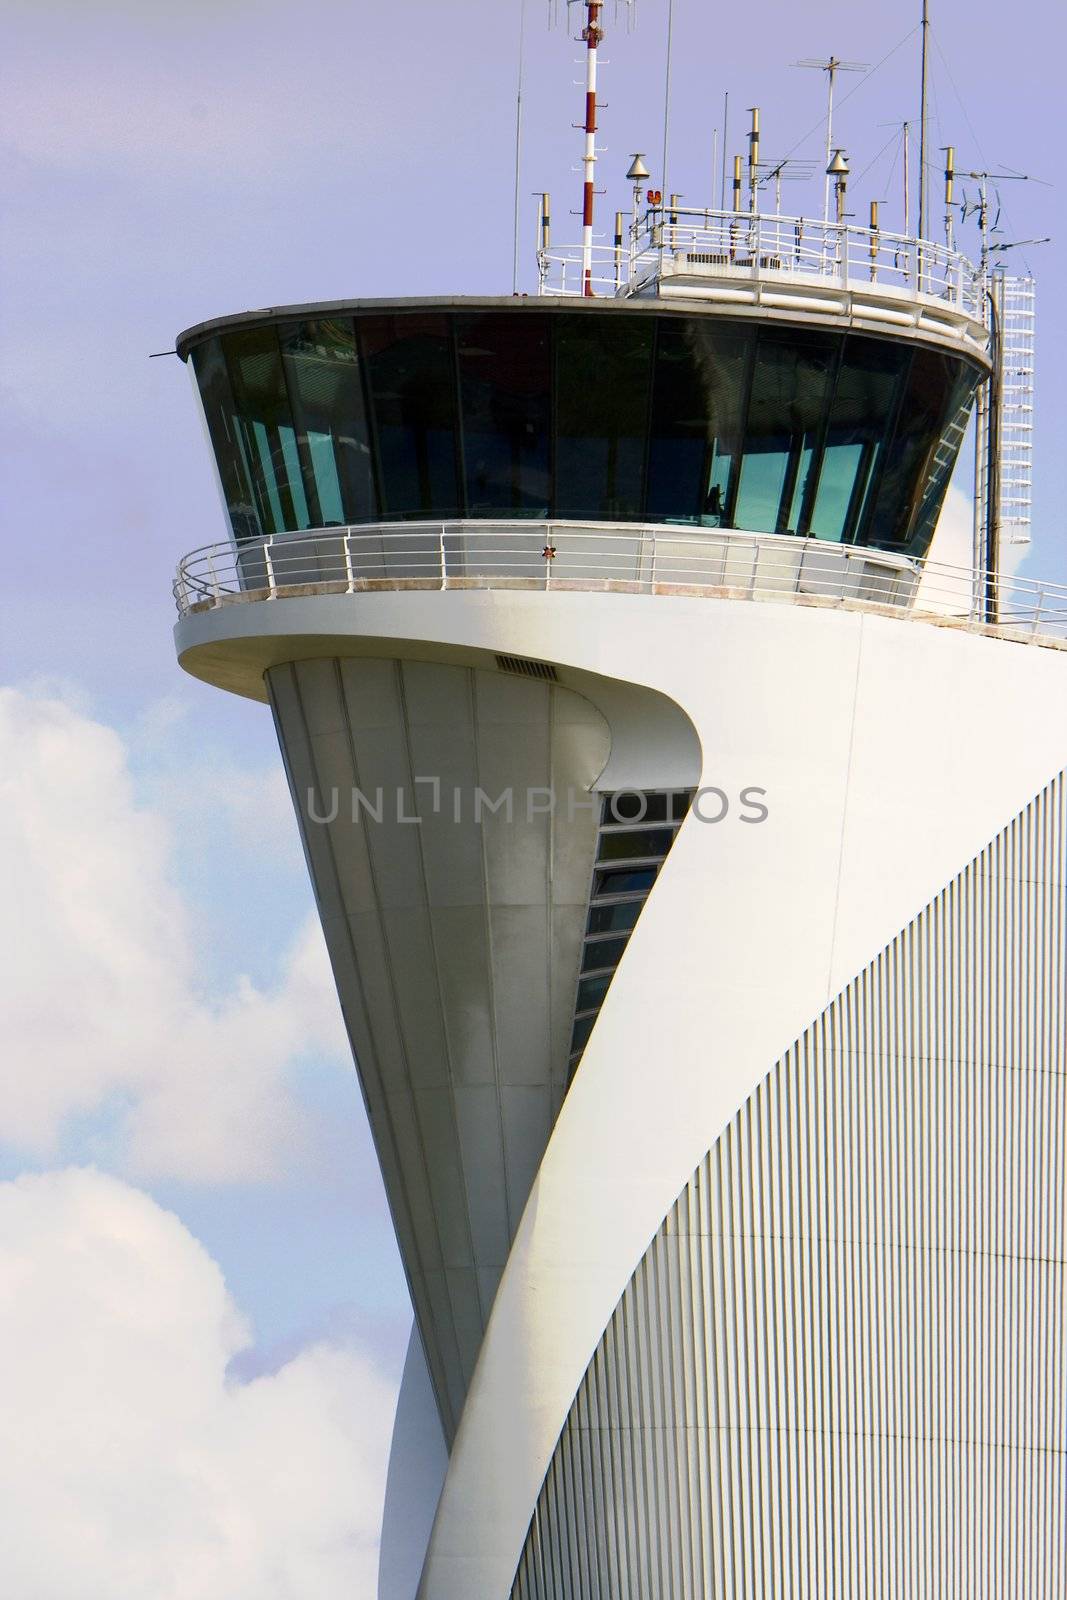 air traffic control tower in the airport of bilbao, spain